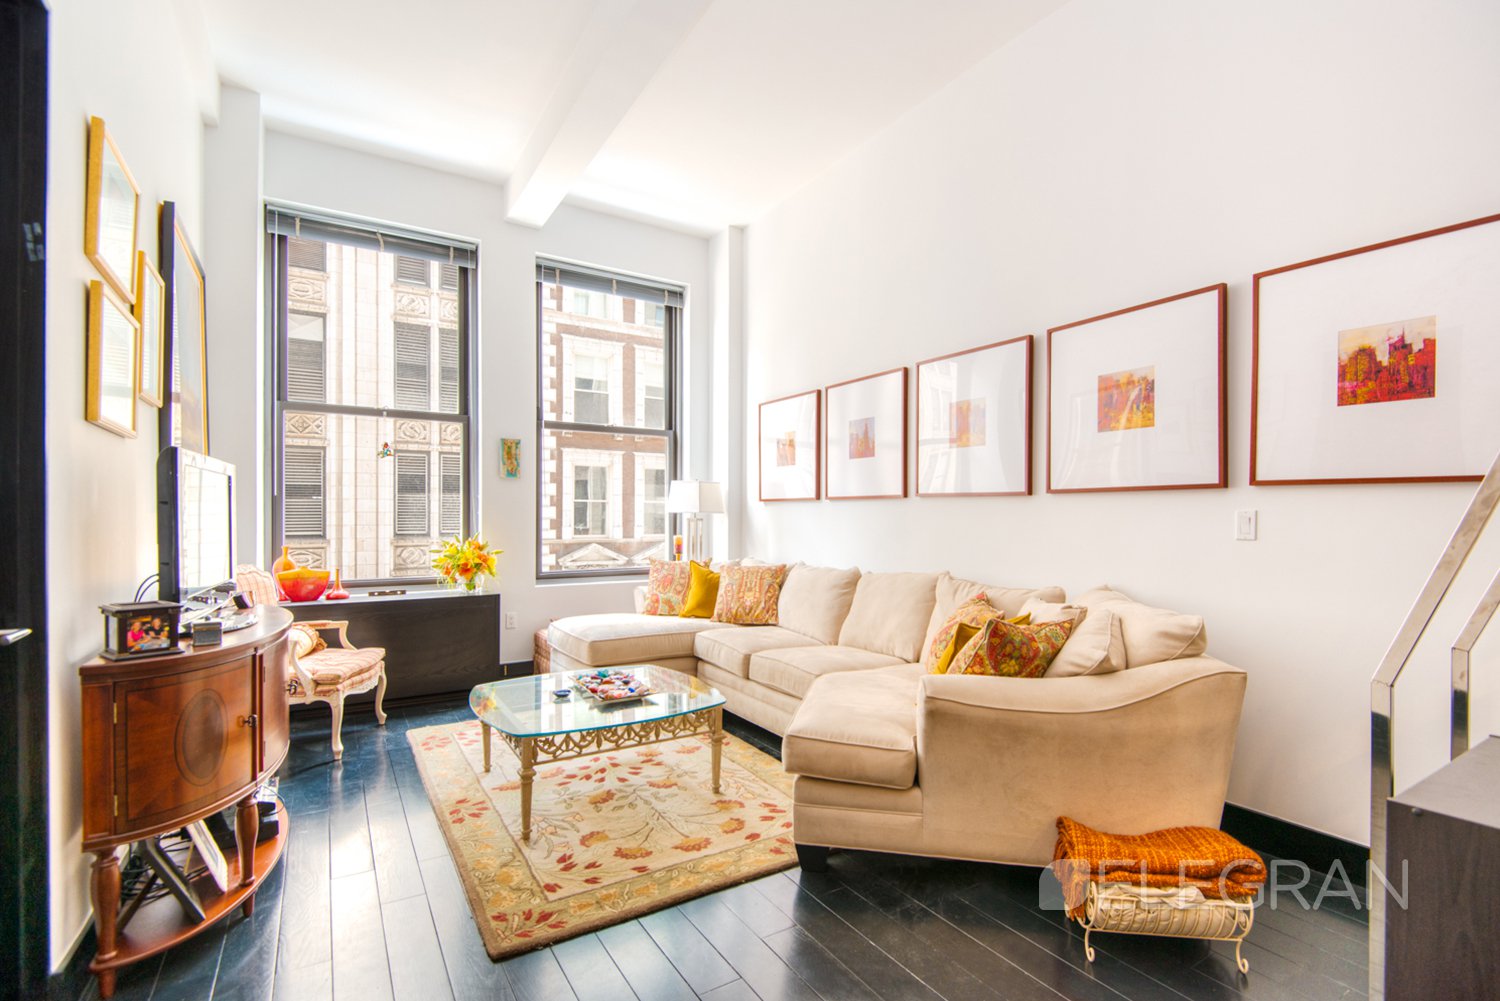 254 Park Avenue South 254 Park Ave S Apartments For Sale Rent In Flatiron Nyc